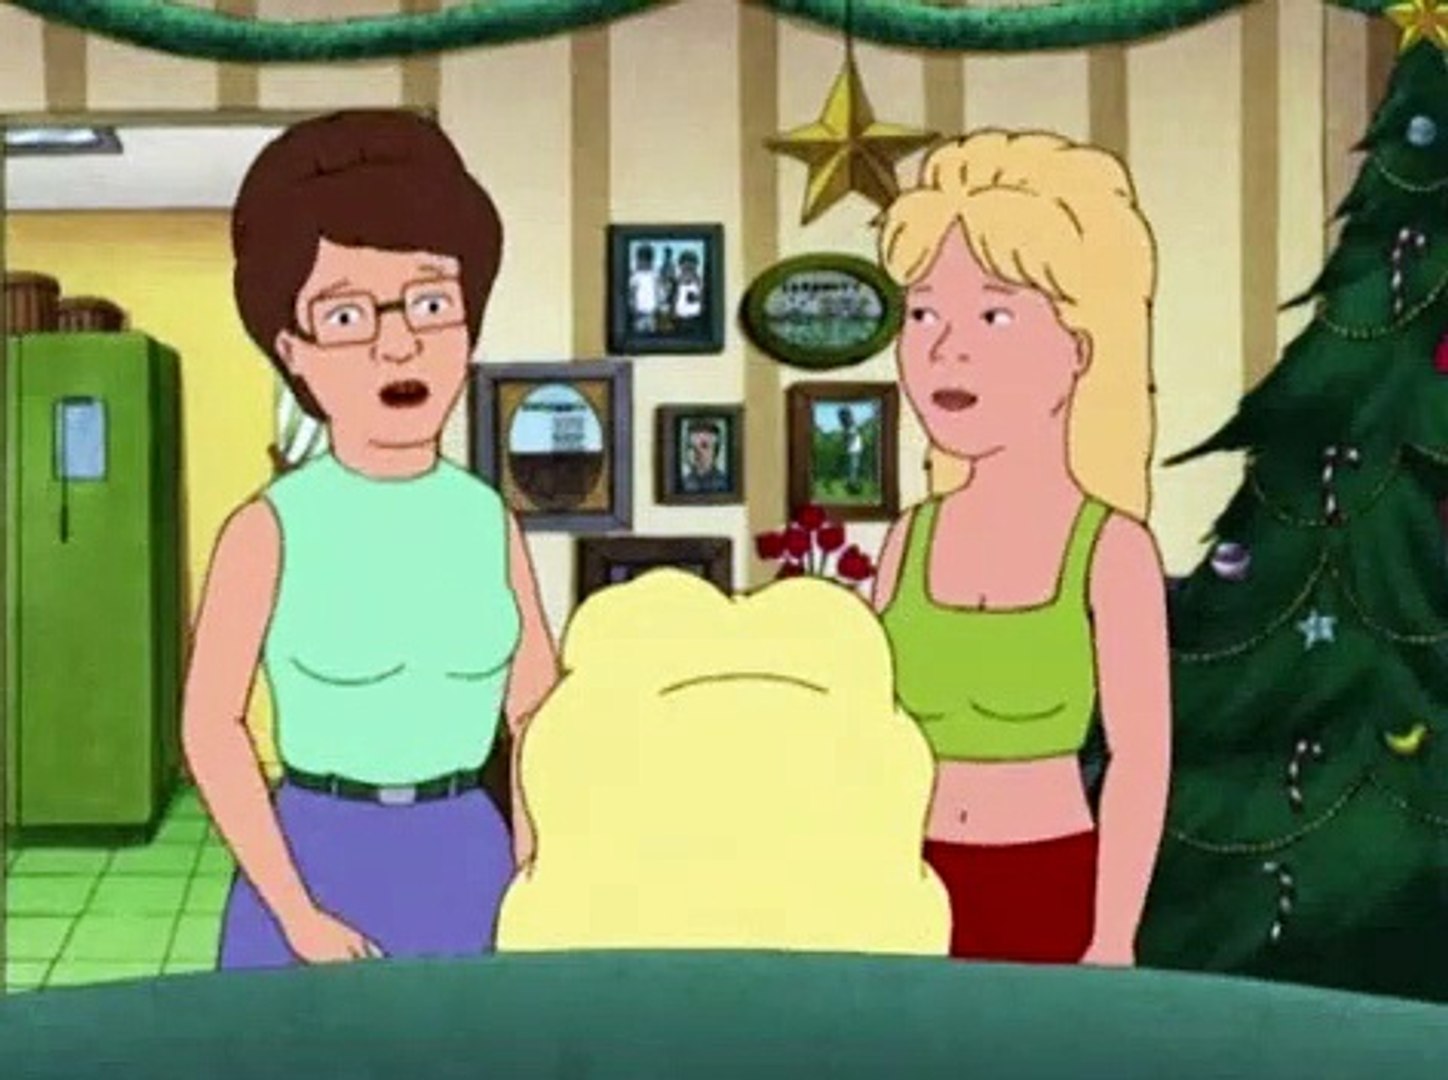 Watch King of the Hill season 8 episode 7 streaming online